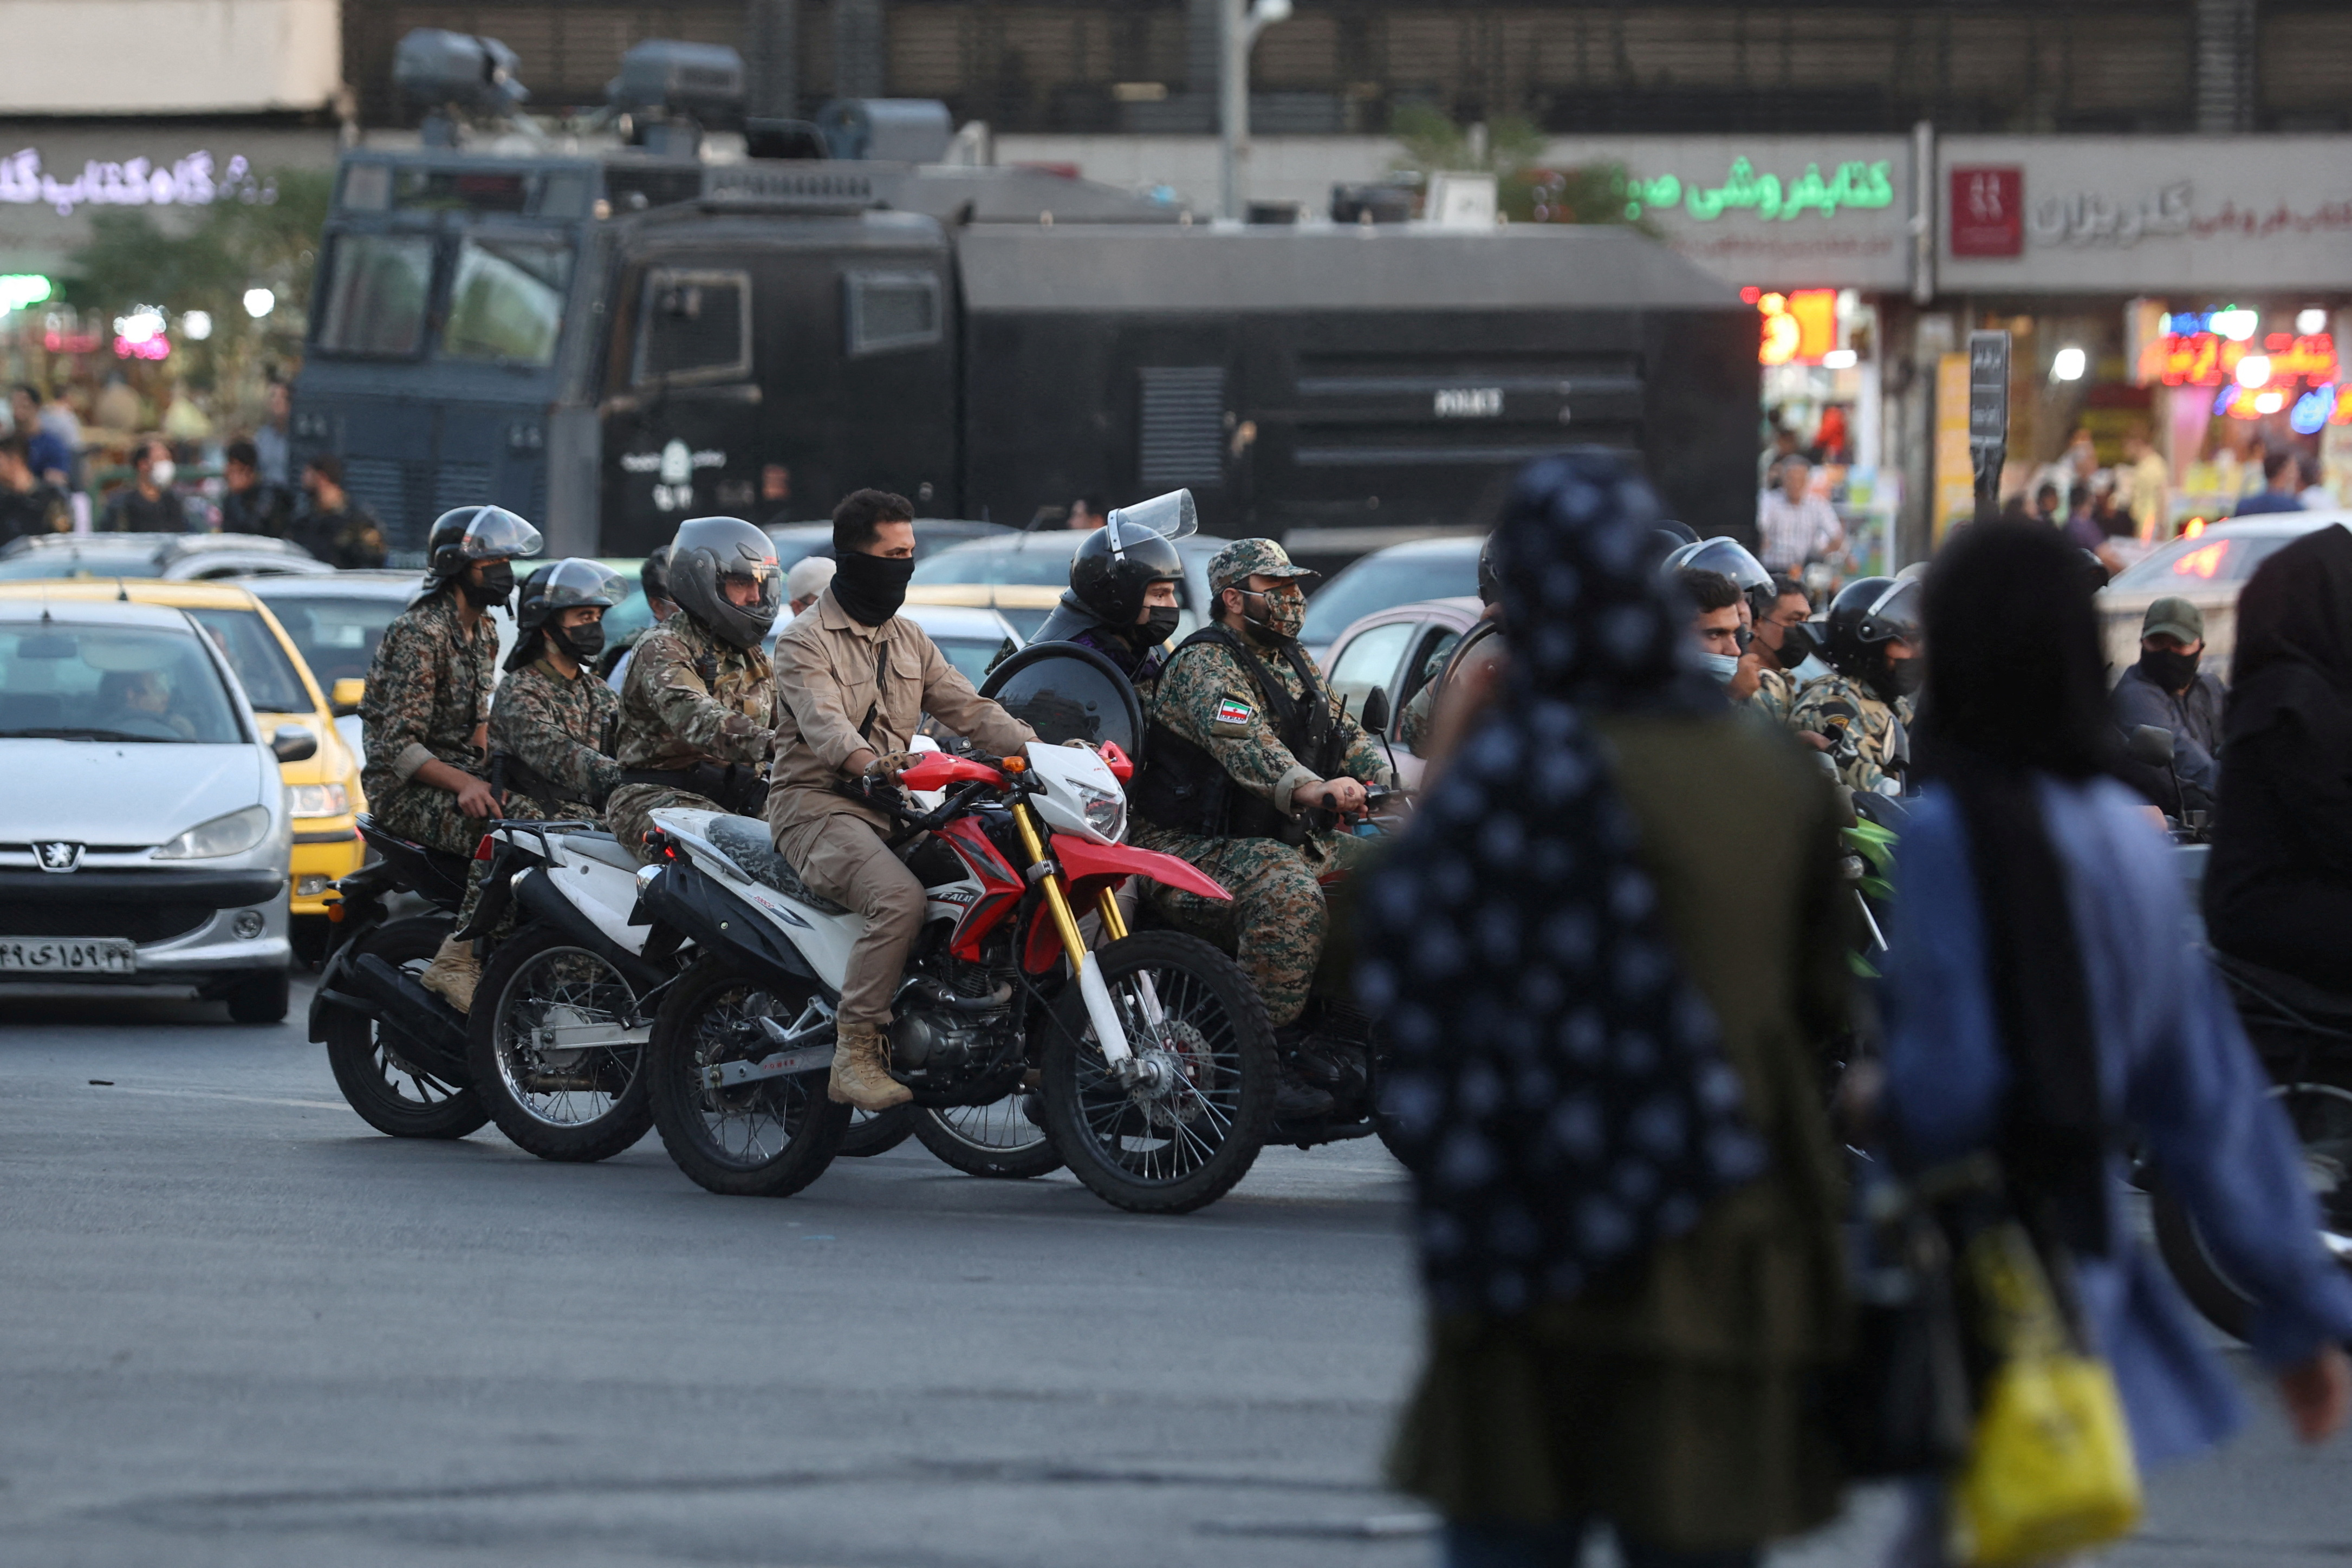 Riot police on the streets of Tehran (WANA/Reuters)